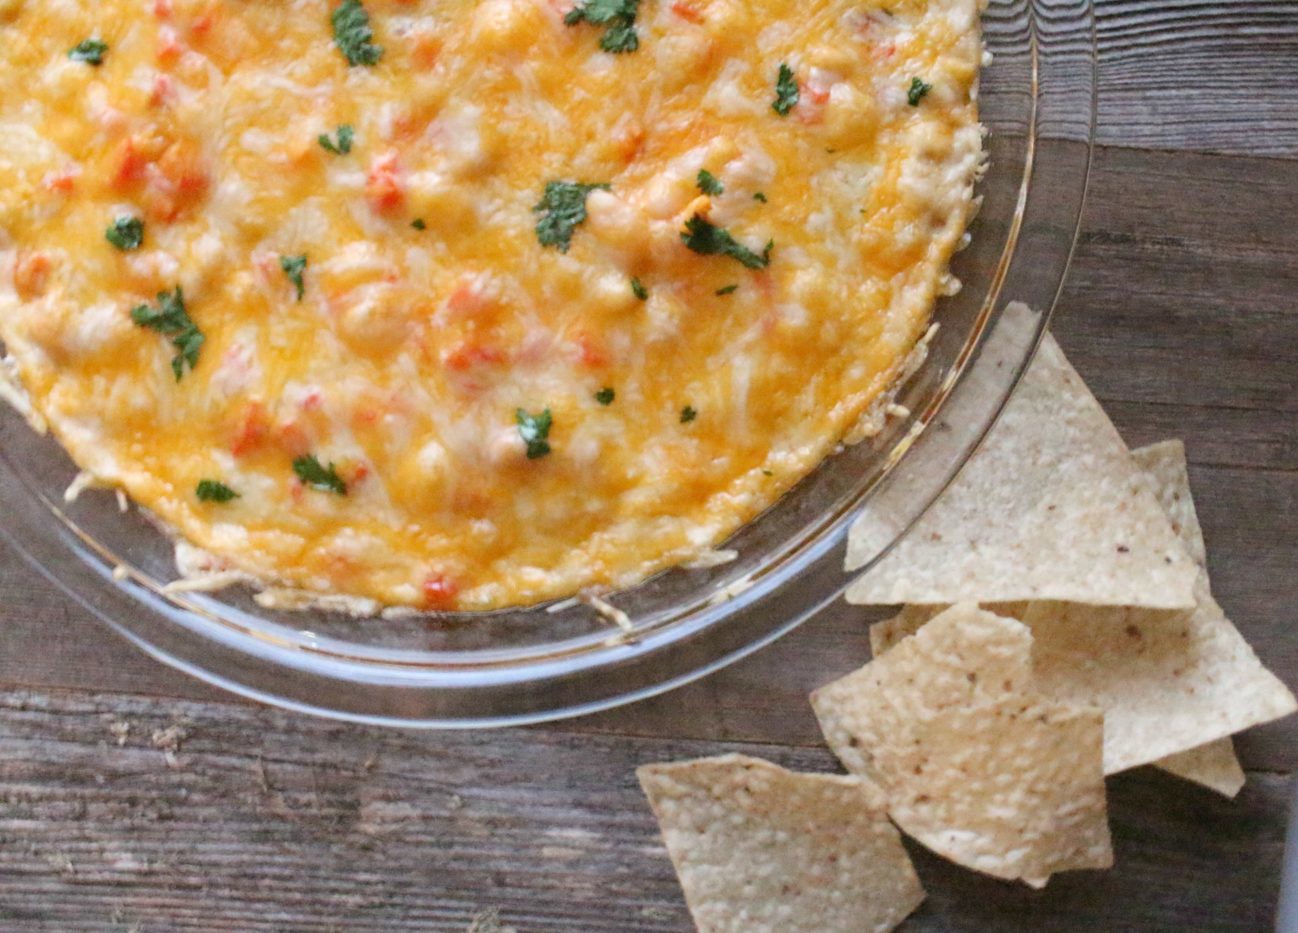 Chicken chili dip is the perfect party food or appetizer.